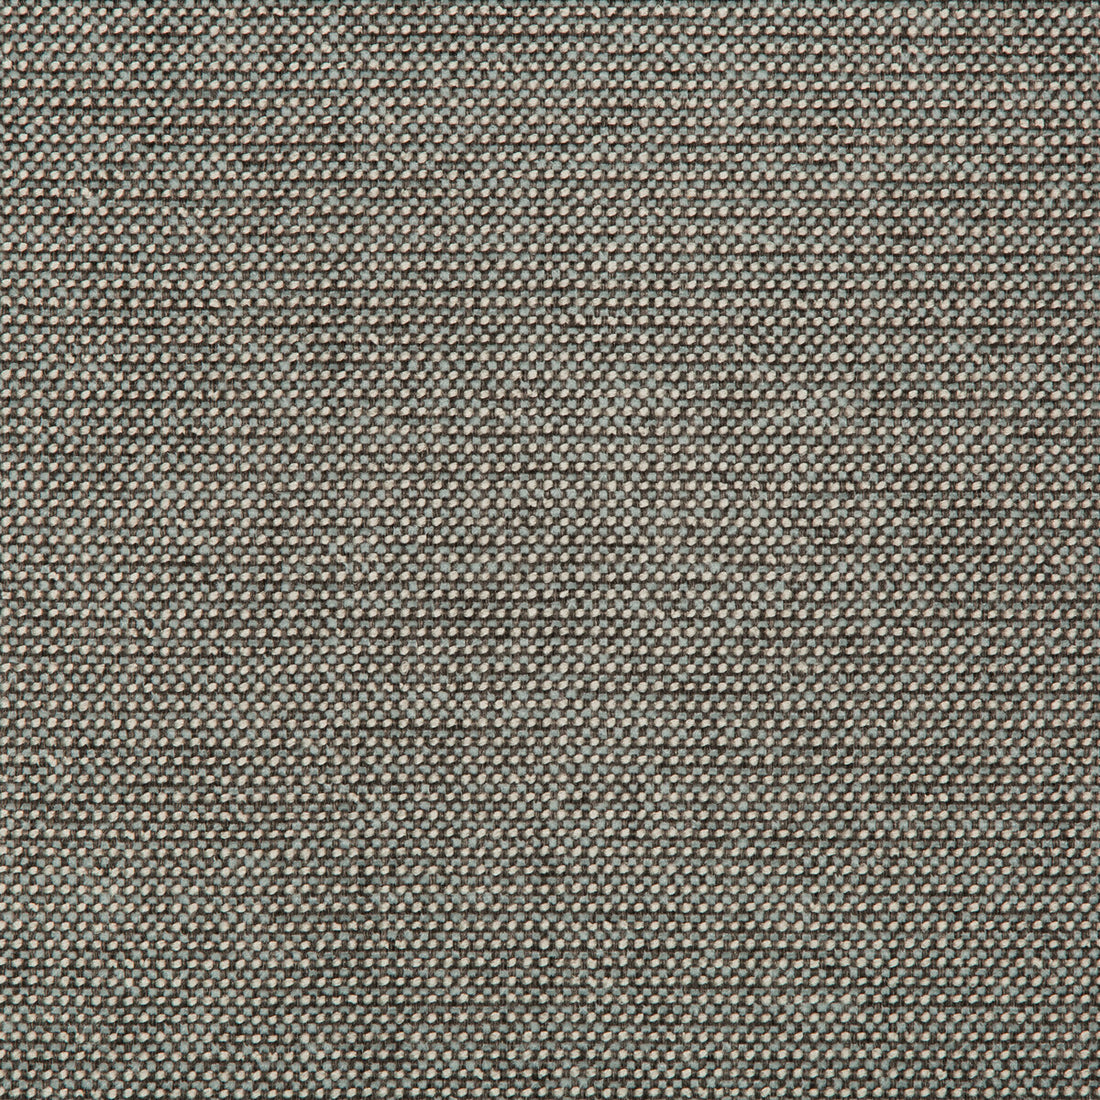 Burr fabric in jet stream color - pattern 35745.815.0 - by Kravet Contract in the Value Kravetarmor collection